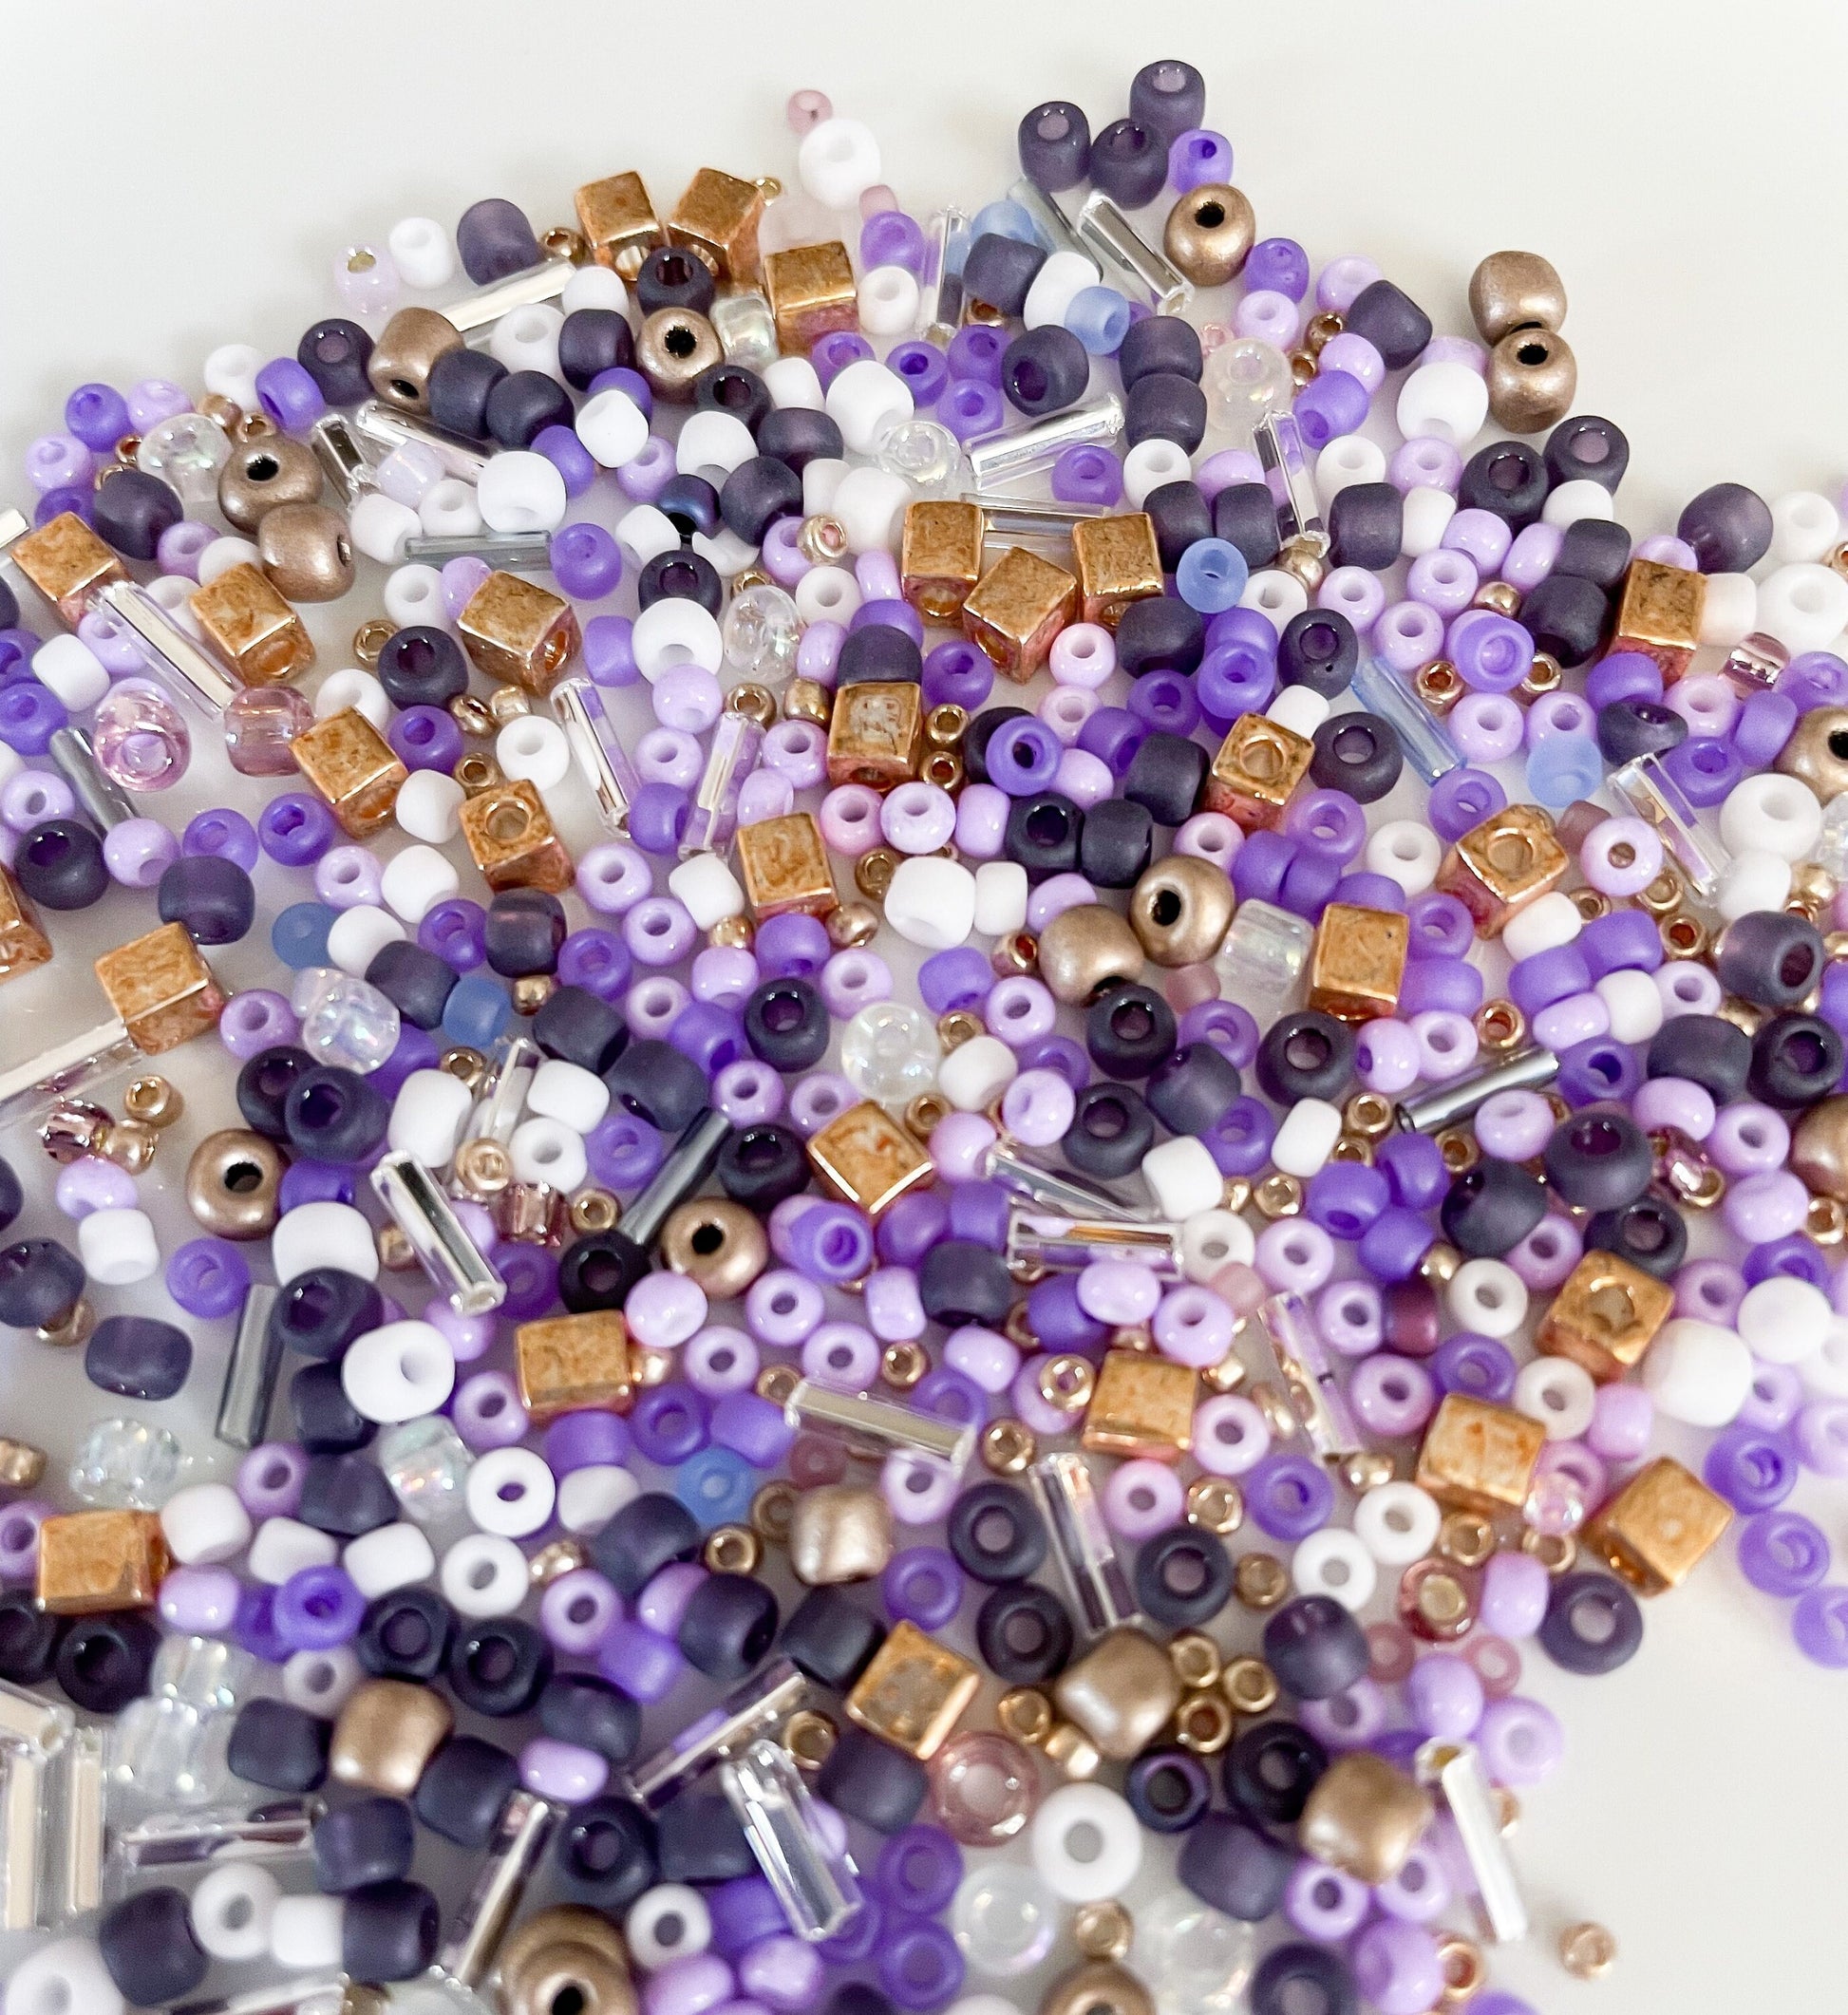 Royal Purple and Gold 20g Seed Bead Mix Bead Blend